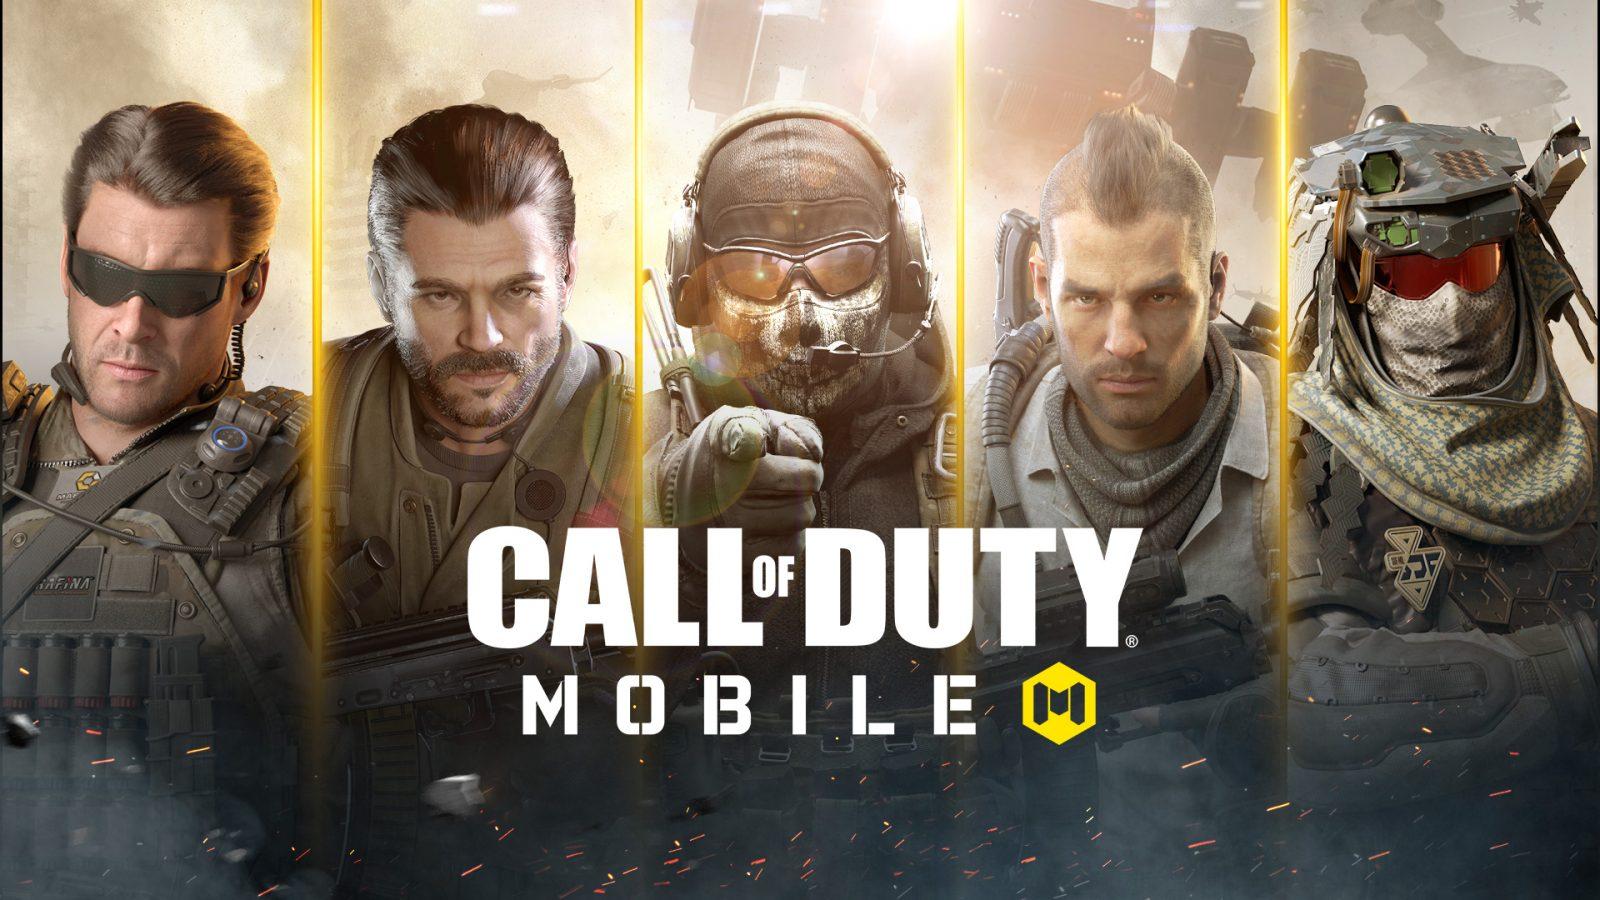 CoD Mobile players nearly outnumber their console and PC